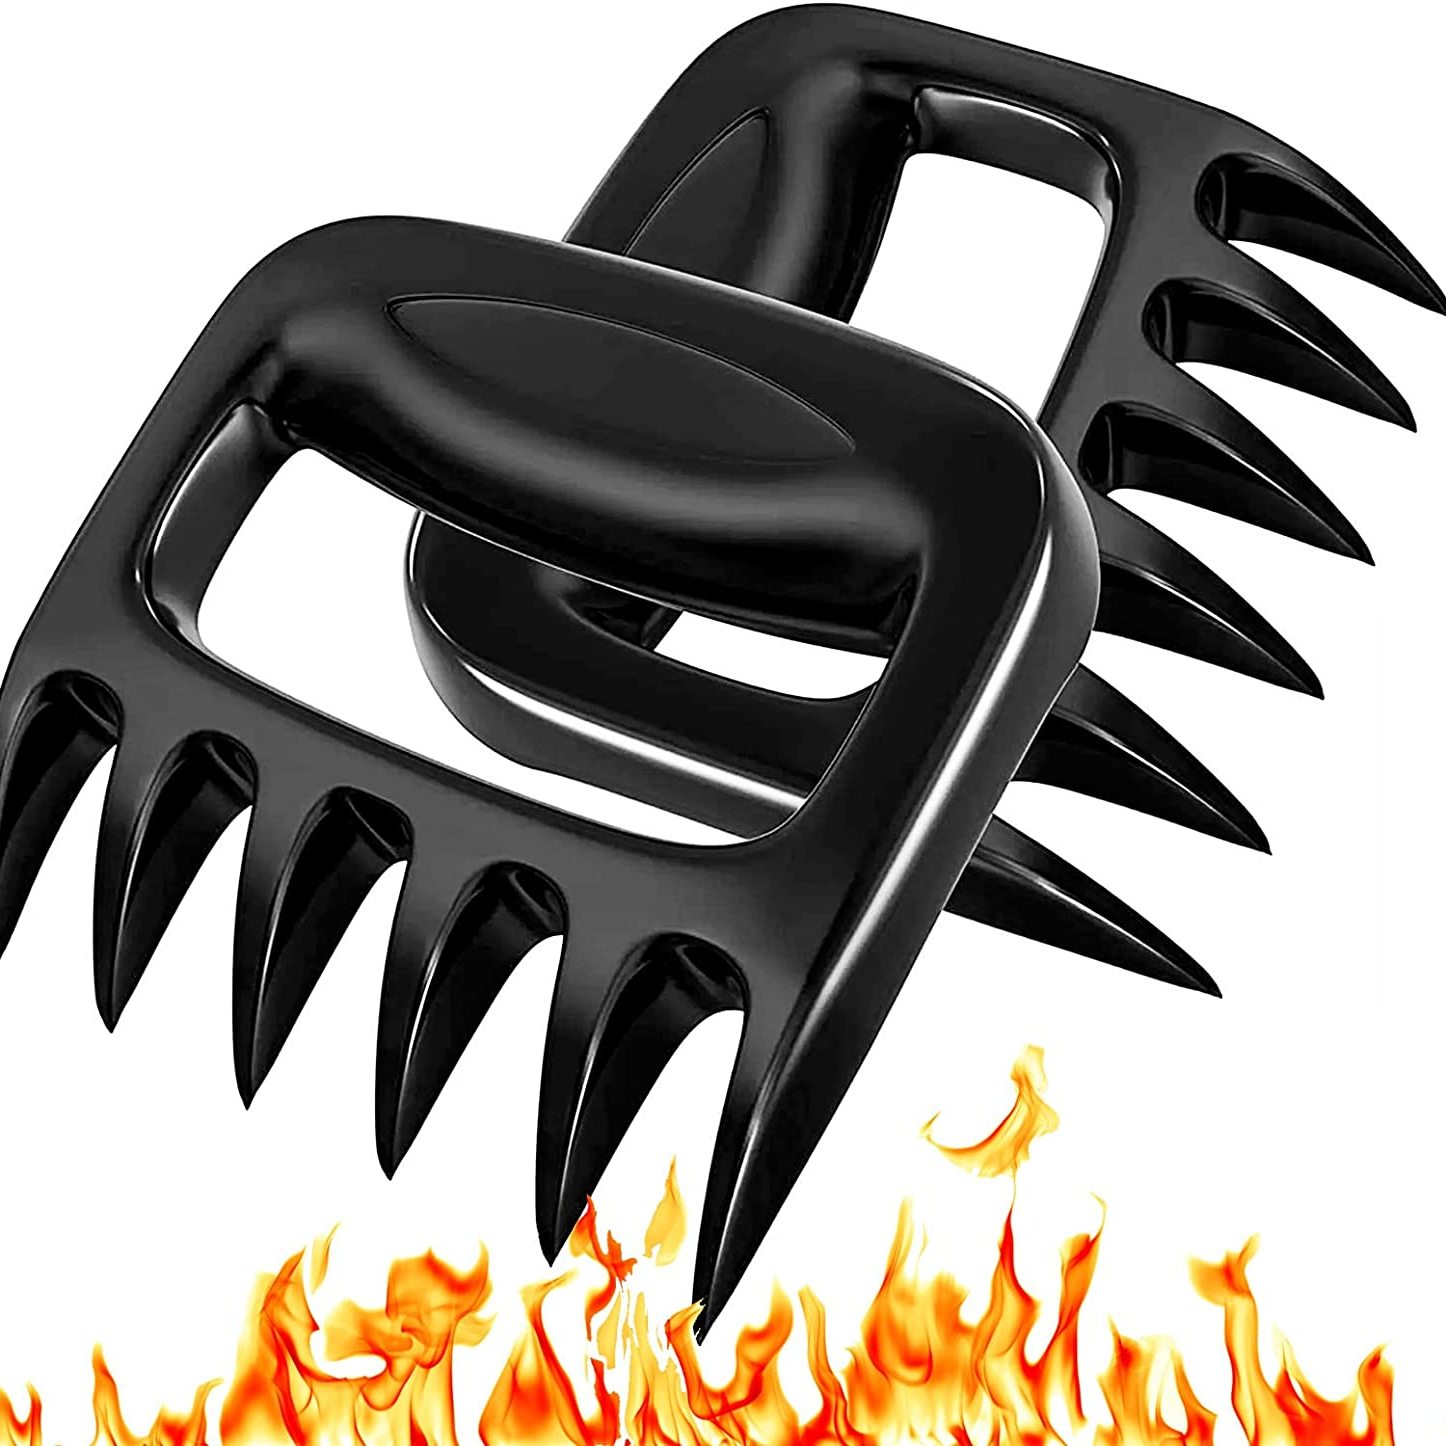 Meat Shredder Claws - Meat Claws for Shredding - Stocking Stuffers